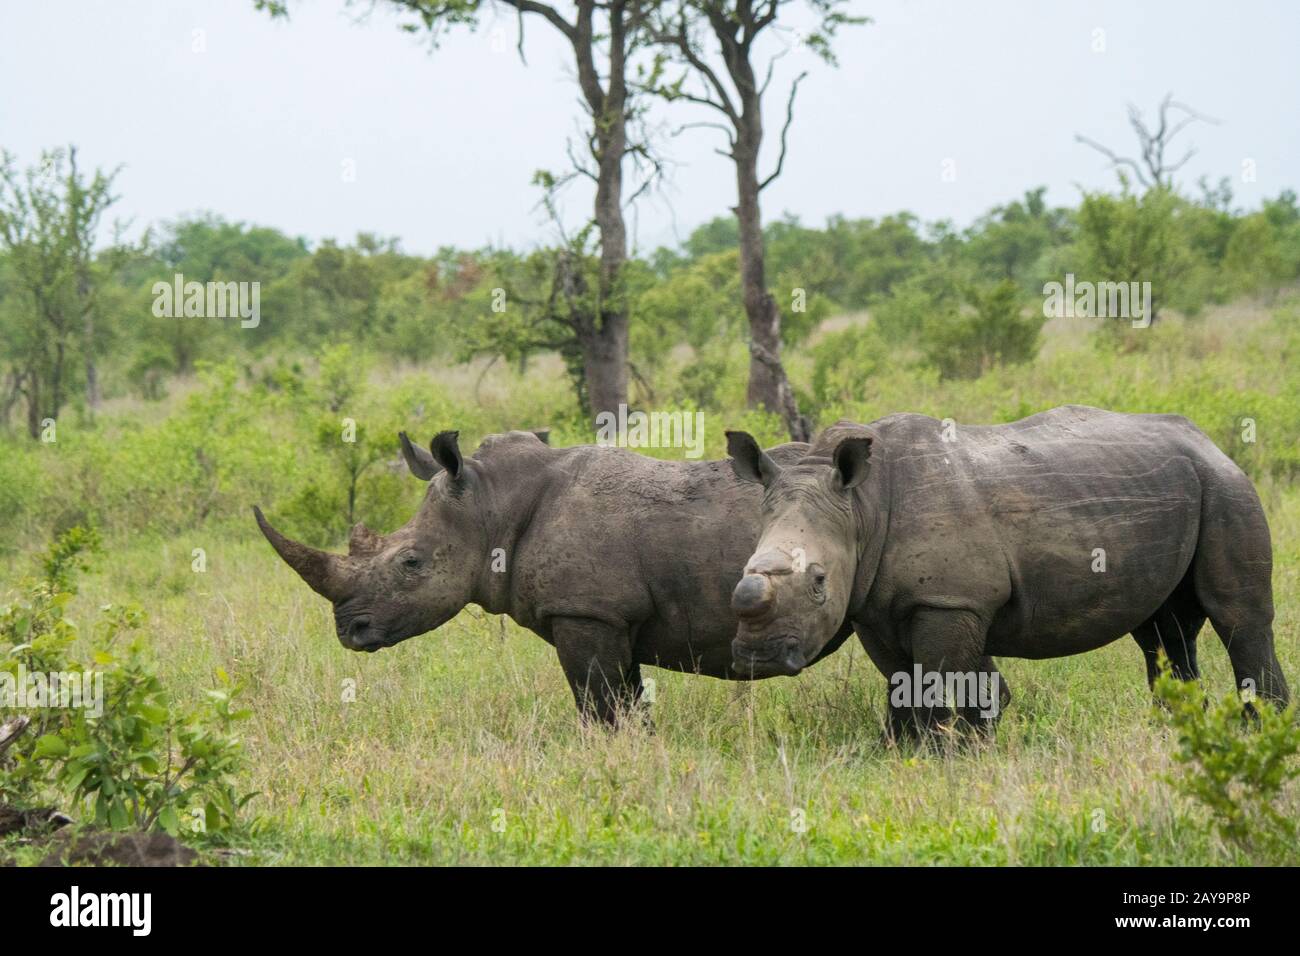 White rhinoceroses or square-lipped rhinoceros (Ceratotherium simum), one dehorned to protect it from poaching, in the Manyeleti Reserve in the Kruger Stock Photo